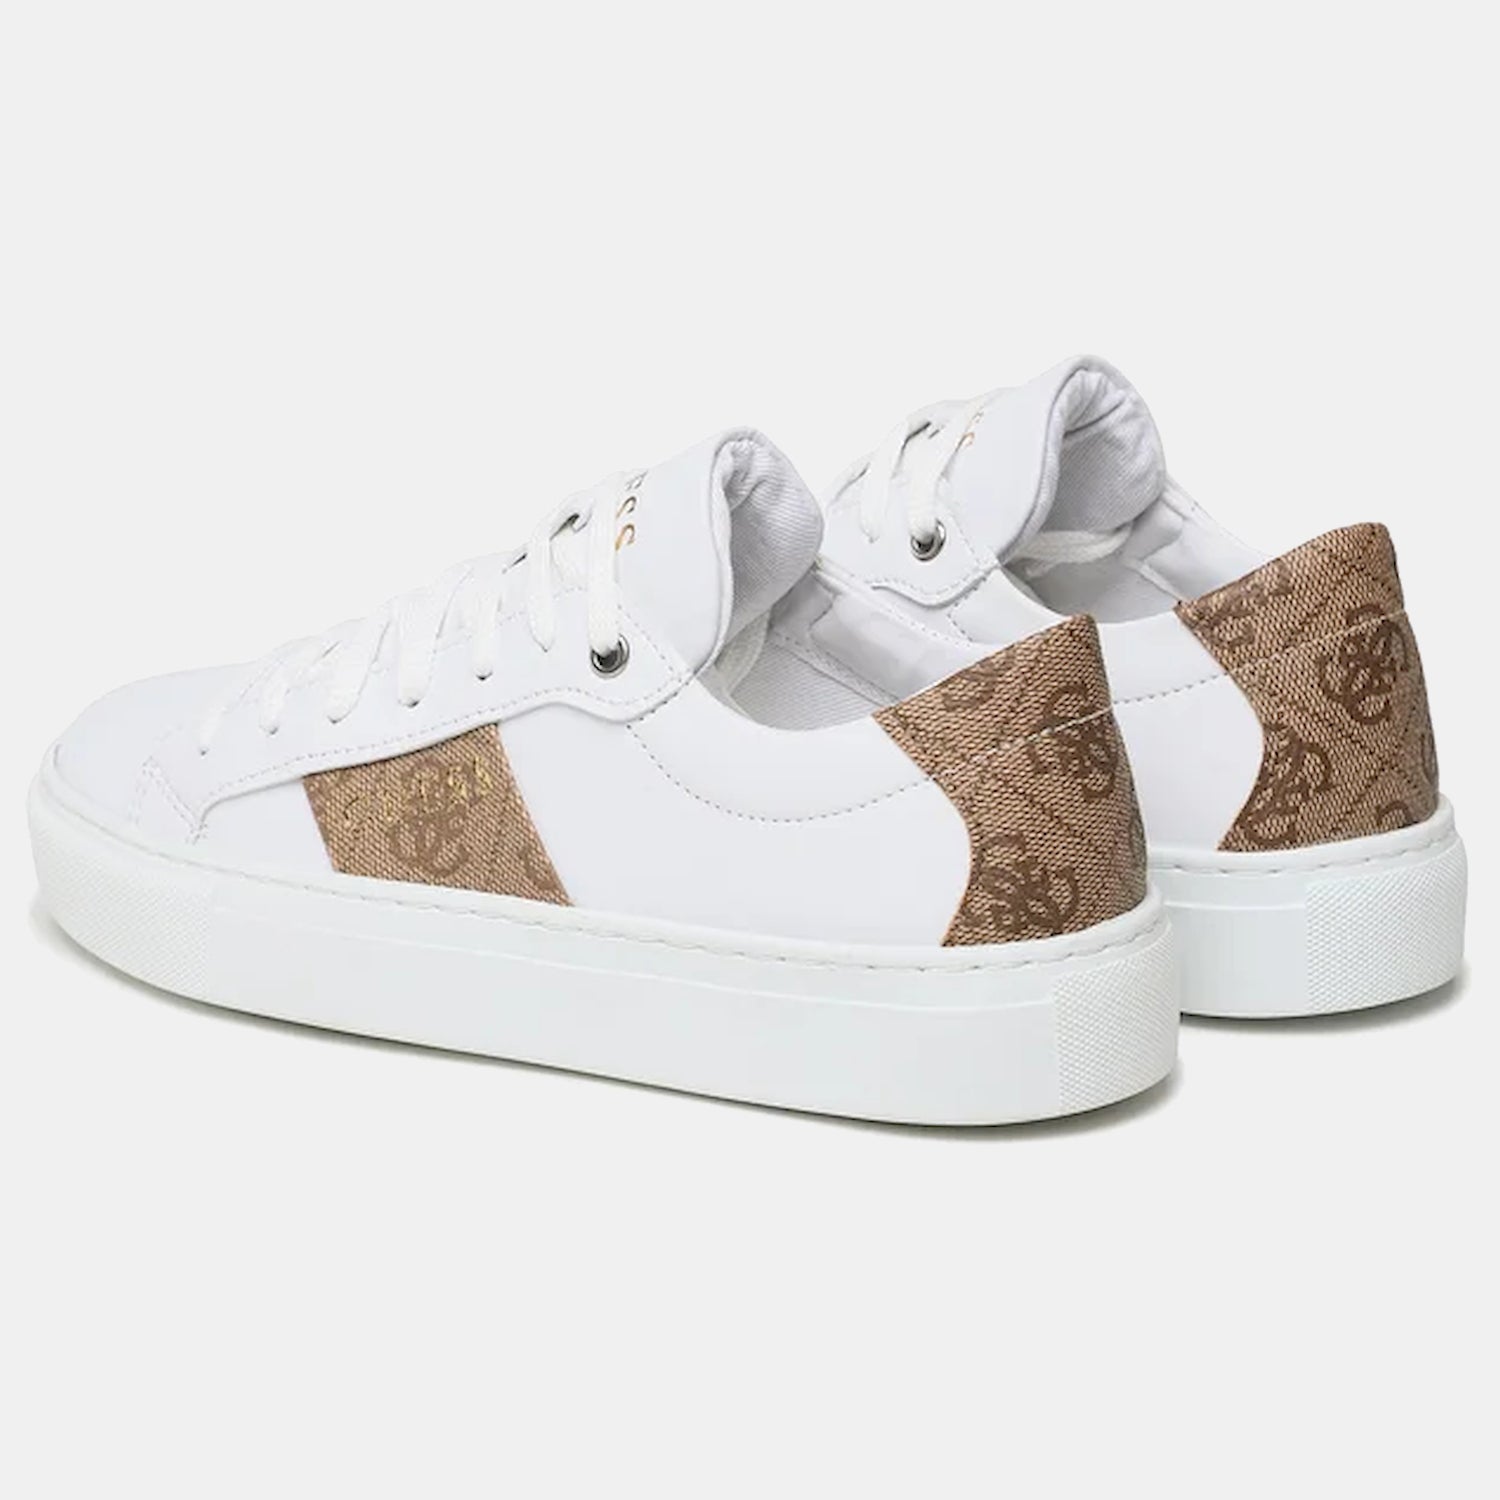 Guess Sapatilhas Sneakers Shoes Fl6tod Whi Brown Branco Castanho_shot2